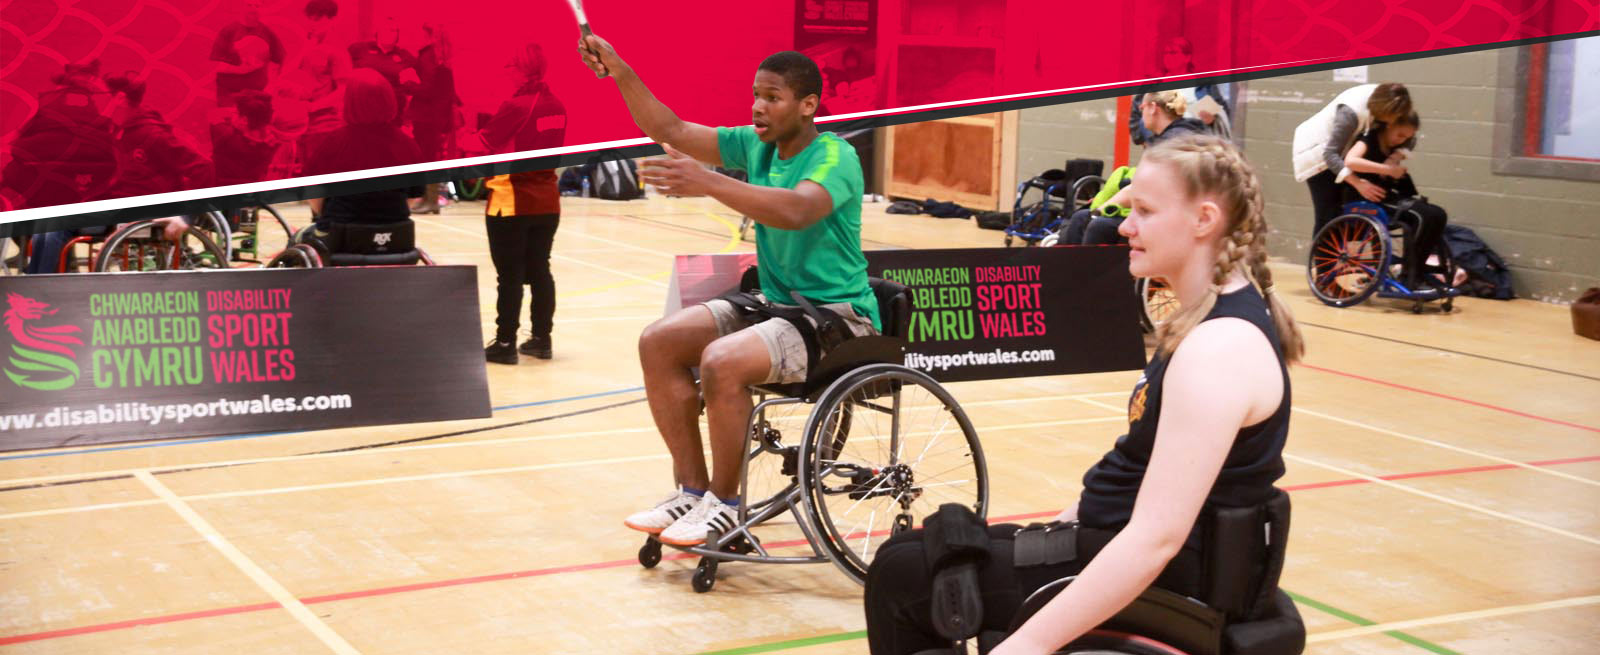 Disability Sport Wales aims to improve the landscape of physical activity for disable people by supporting community and elite level opportunities, as well as training and support to the sport, physical activity and sport sectors.